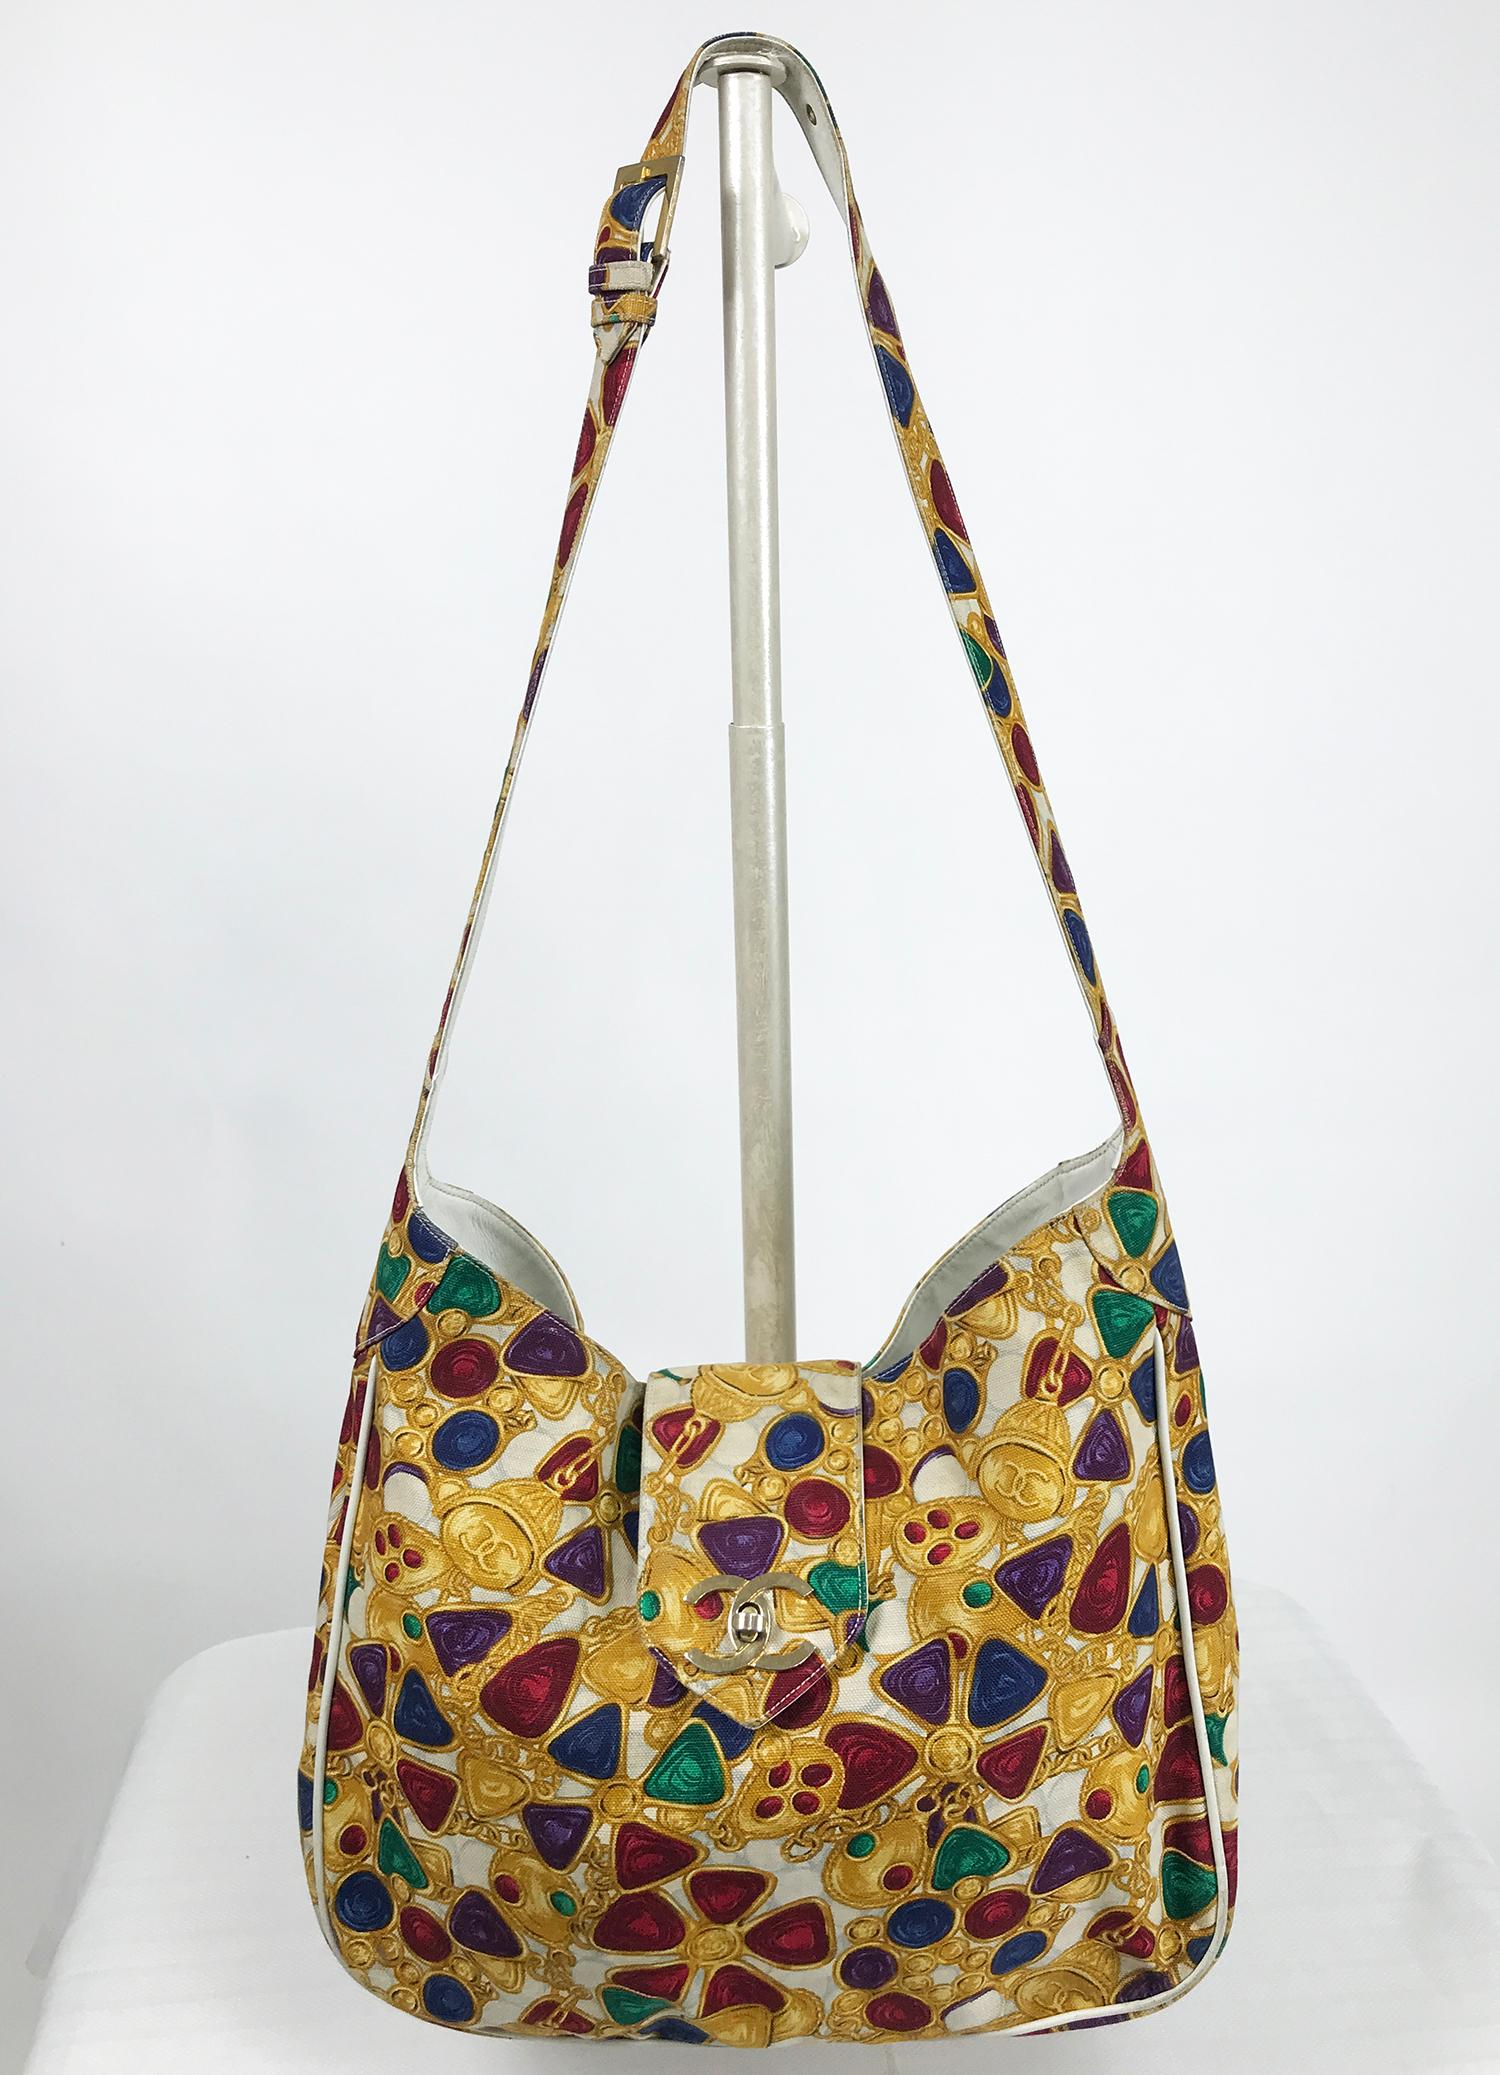 RARE Vintage Chanel Gripoix large printed canvas and leather shoulder bag from the 1980s. An early piece, this zero series bag is from 1986-1988. The jewel print is colourful and so recognized, this will make an amazing addition to any Chanel